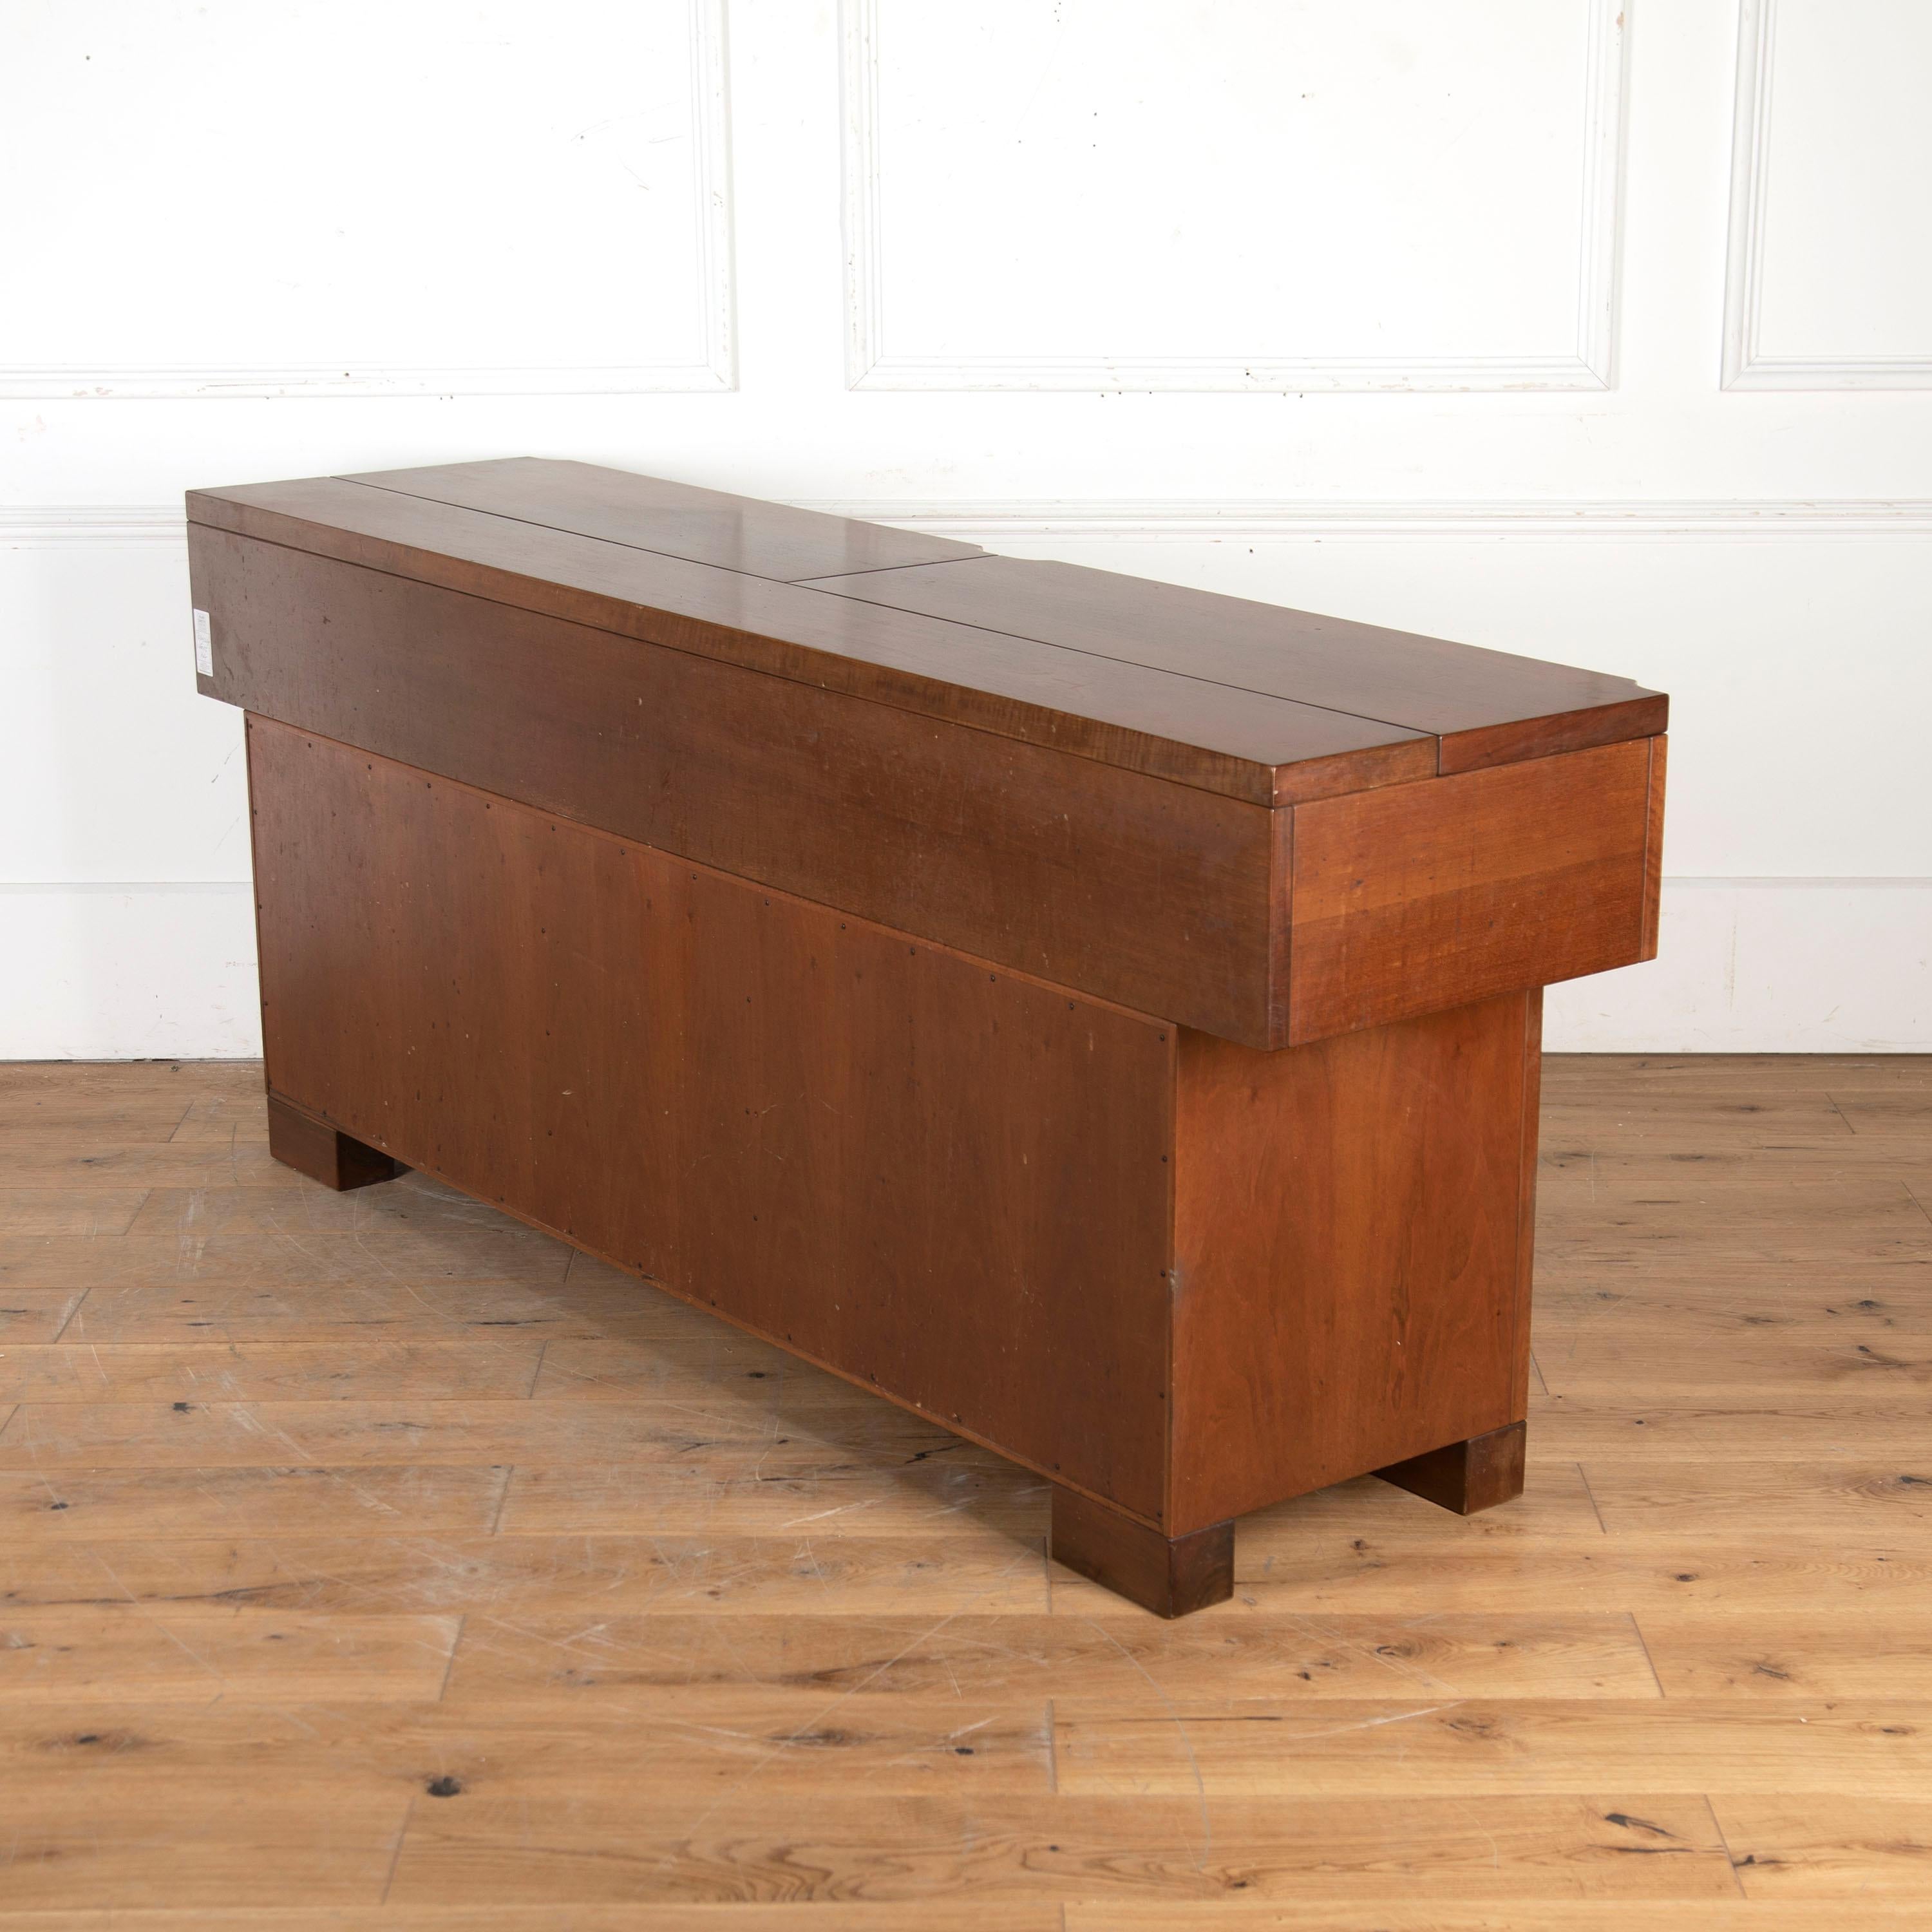 Superb mid 20th Century Italian solid walnut sideboard, designed by Giovanni Michelucci for Poltronova.

With strong architectural lines, this piece features three cupboards, two drawers and is signed by the designer.

This is a fantastic